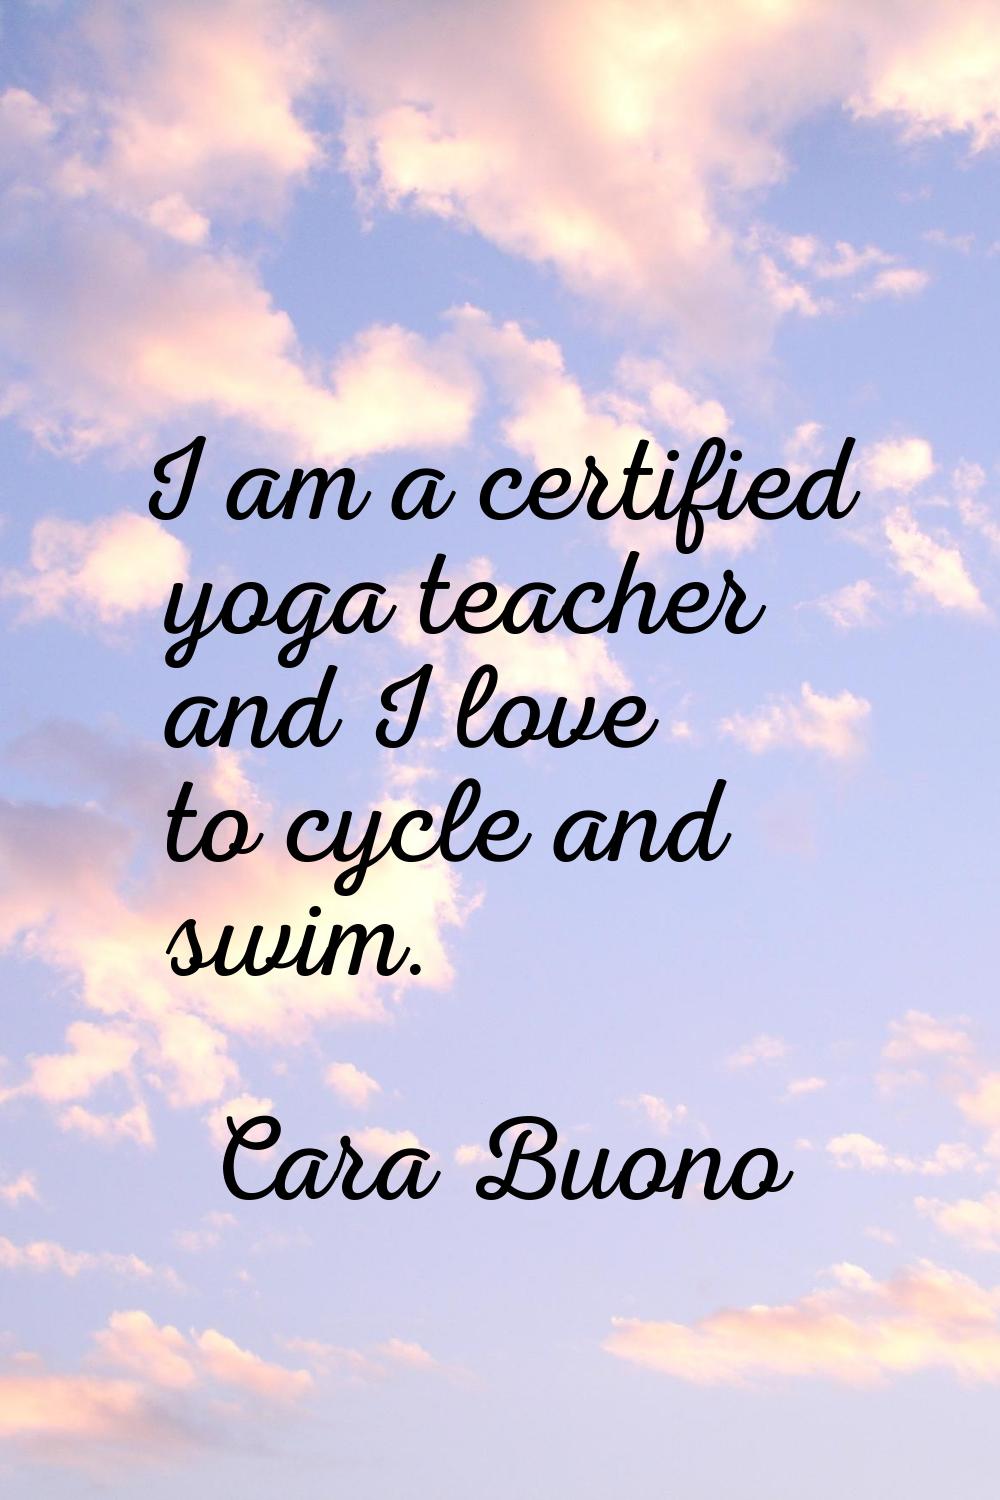 I am a certified yoga teacher and I love to cycle and swim.